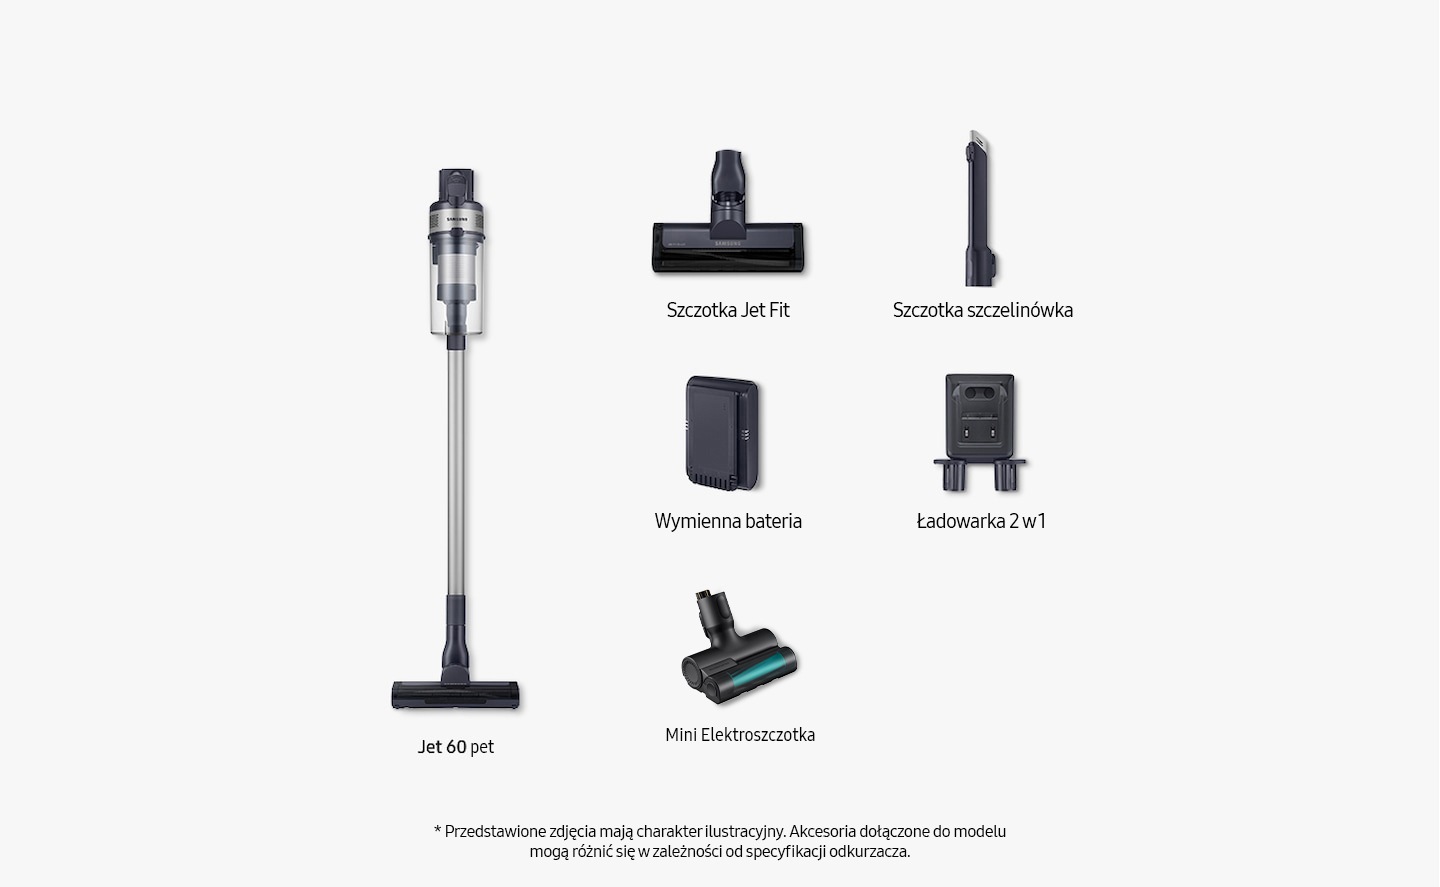 Items included inbox shown: Jet 60 Fit, jet fit brush, extension crevice tool, battery and 2-in-1 charger.All images shown are for illustration purpose only.  Actual model may vary depending on specifications.